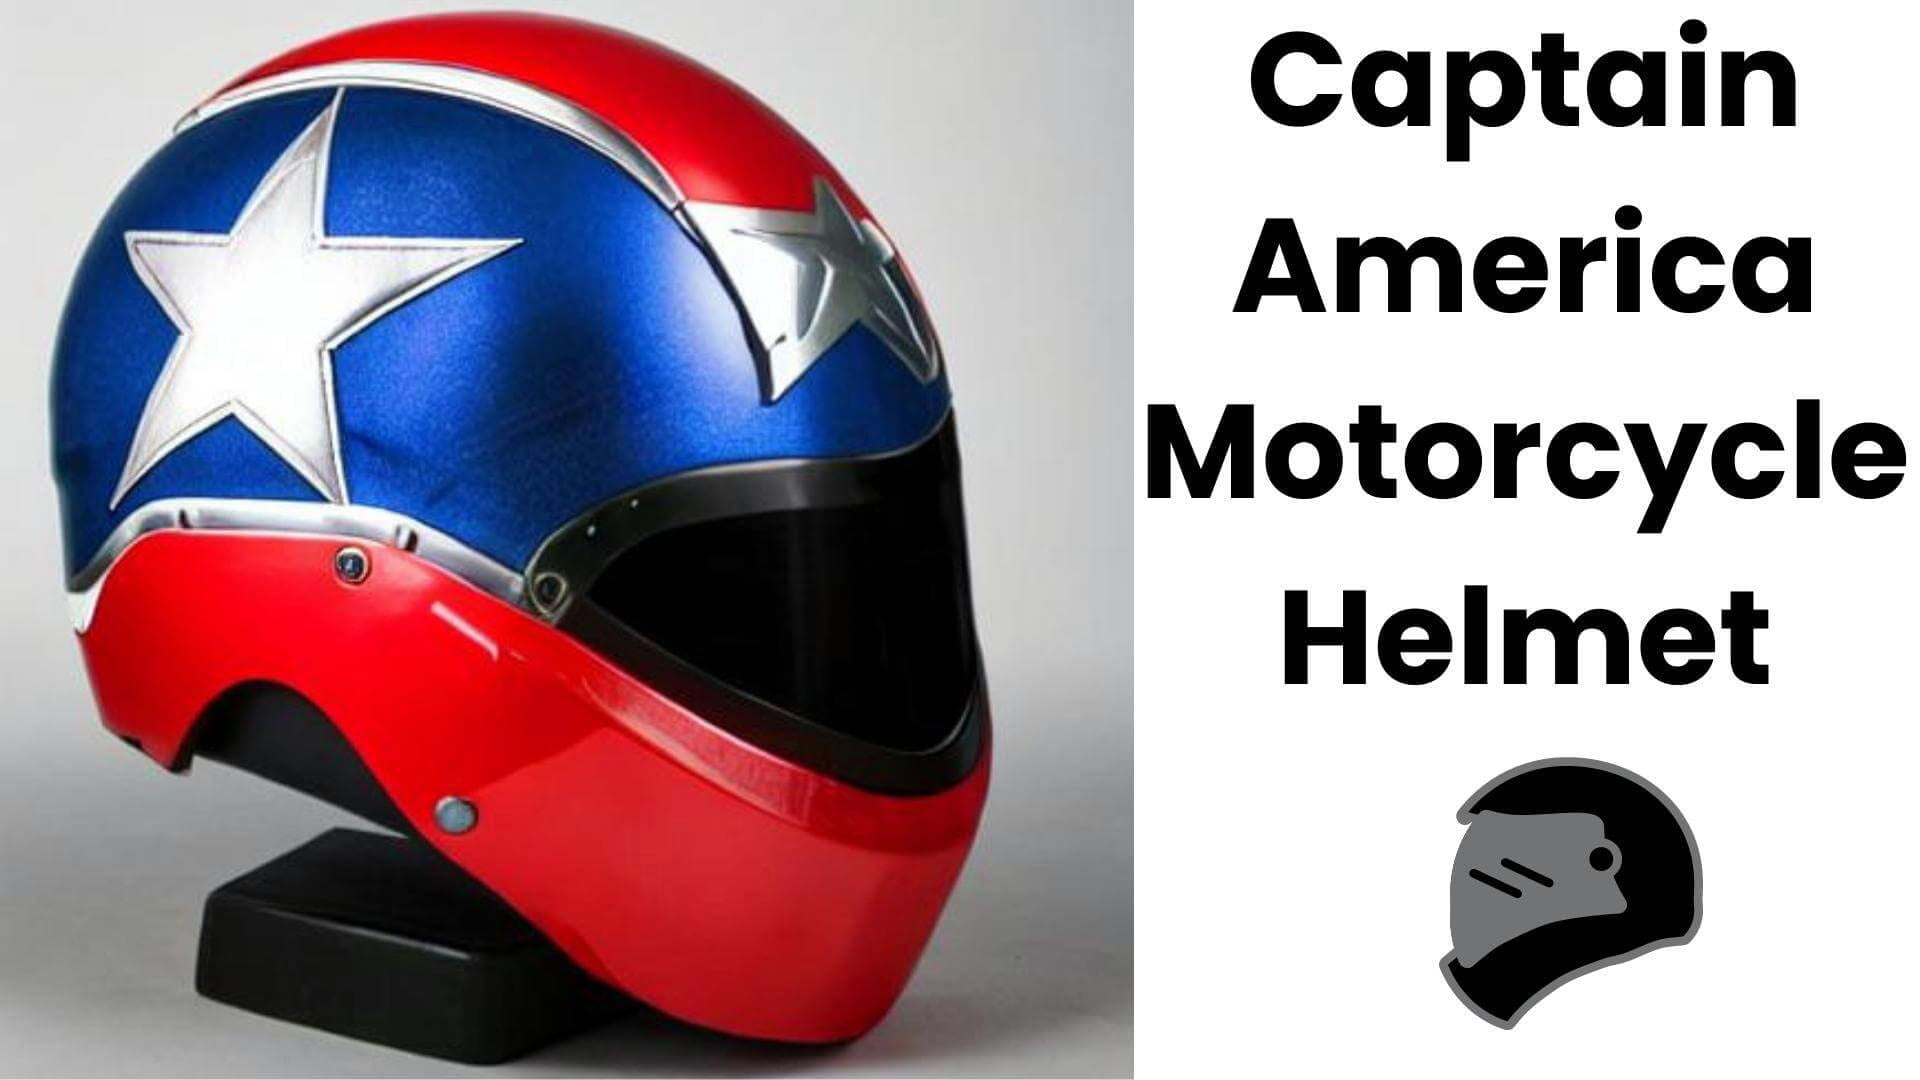 Captain America Motorcycle Helmet: The Ultimate Guide To Choosing The Right One For You